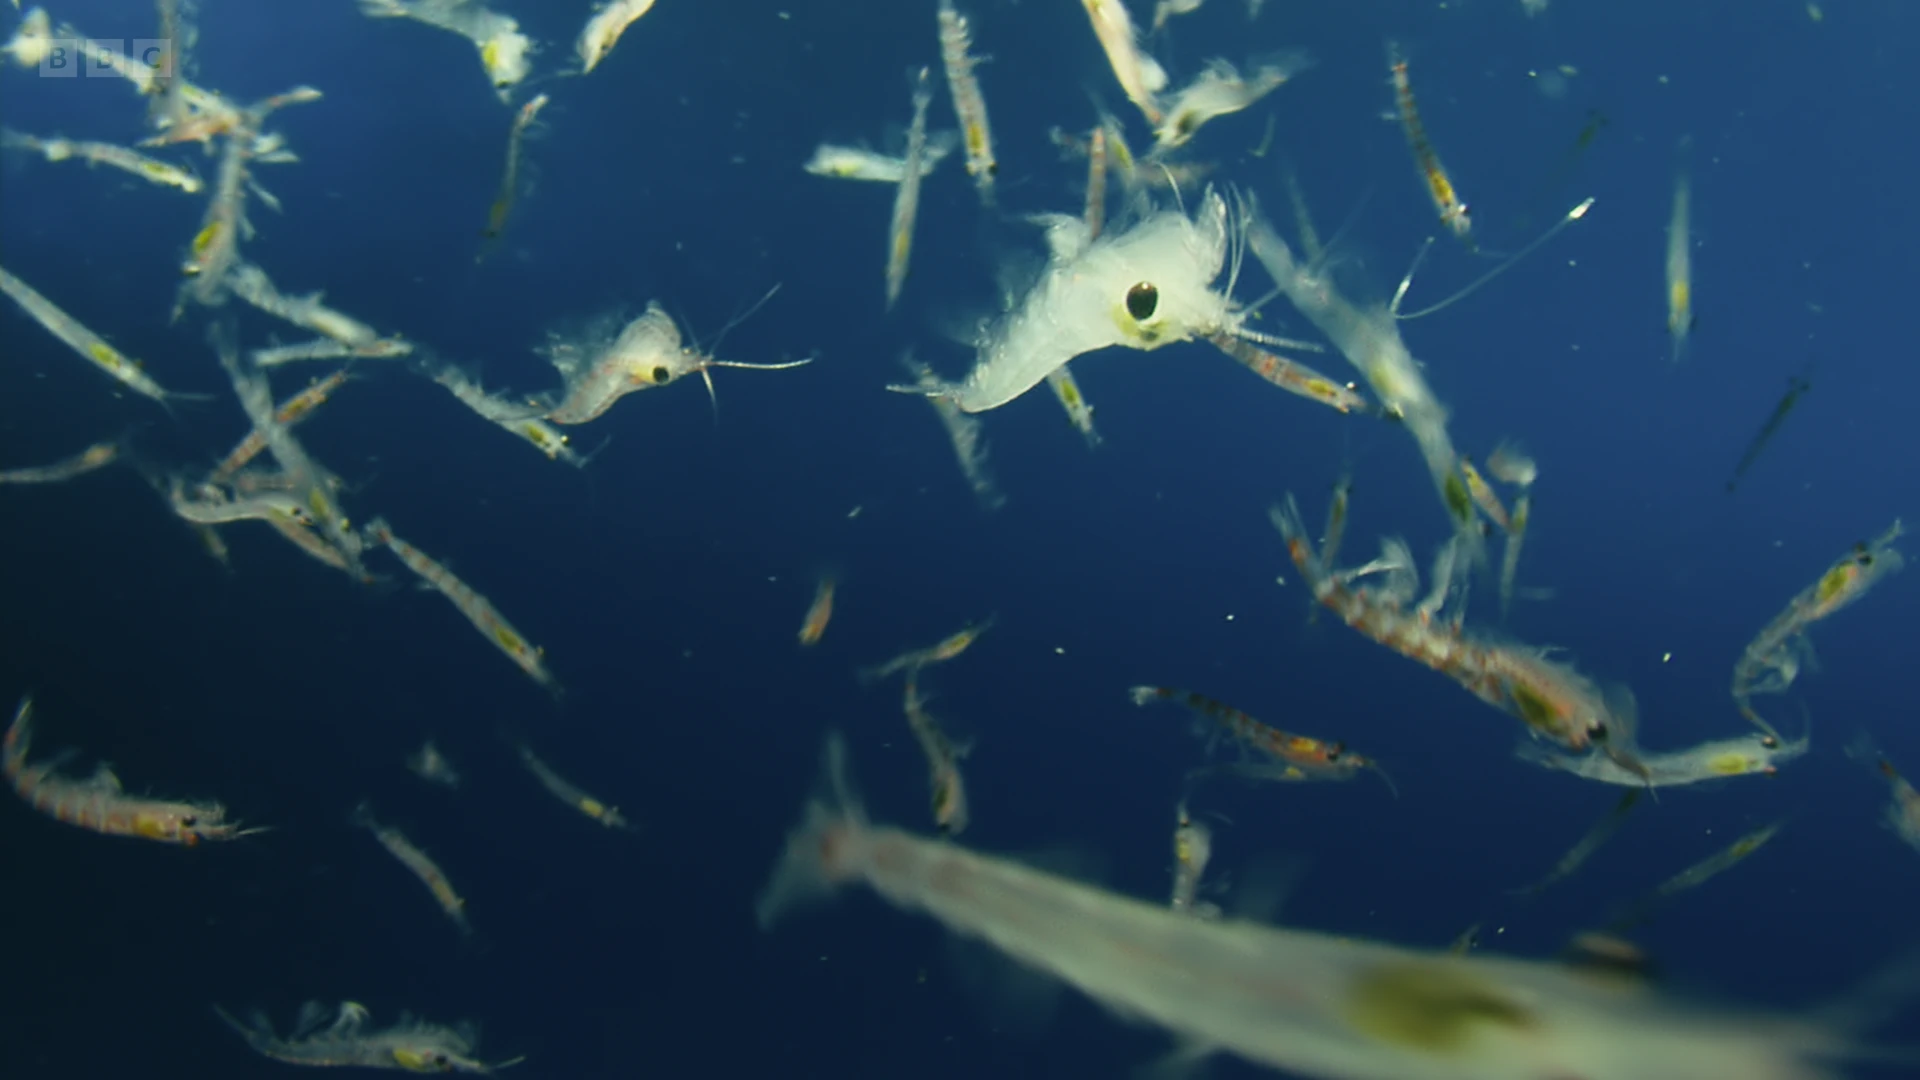 Krill sp. () as shown in A Perfect Planet - The Sun